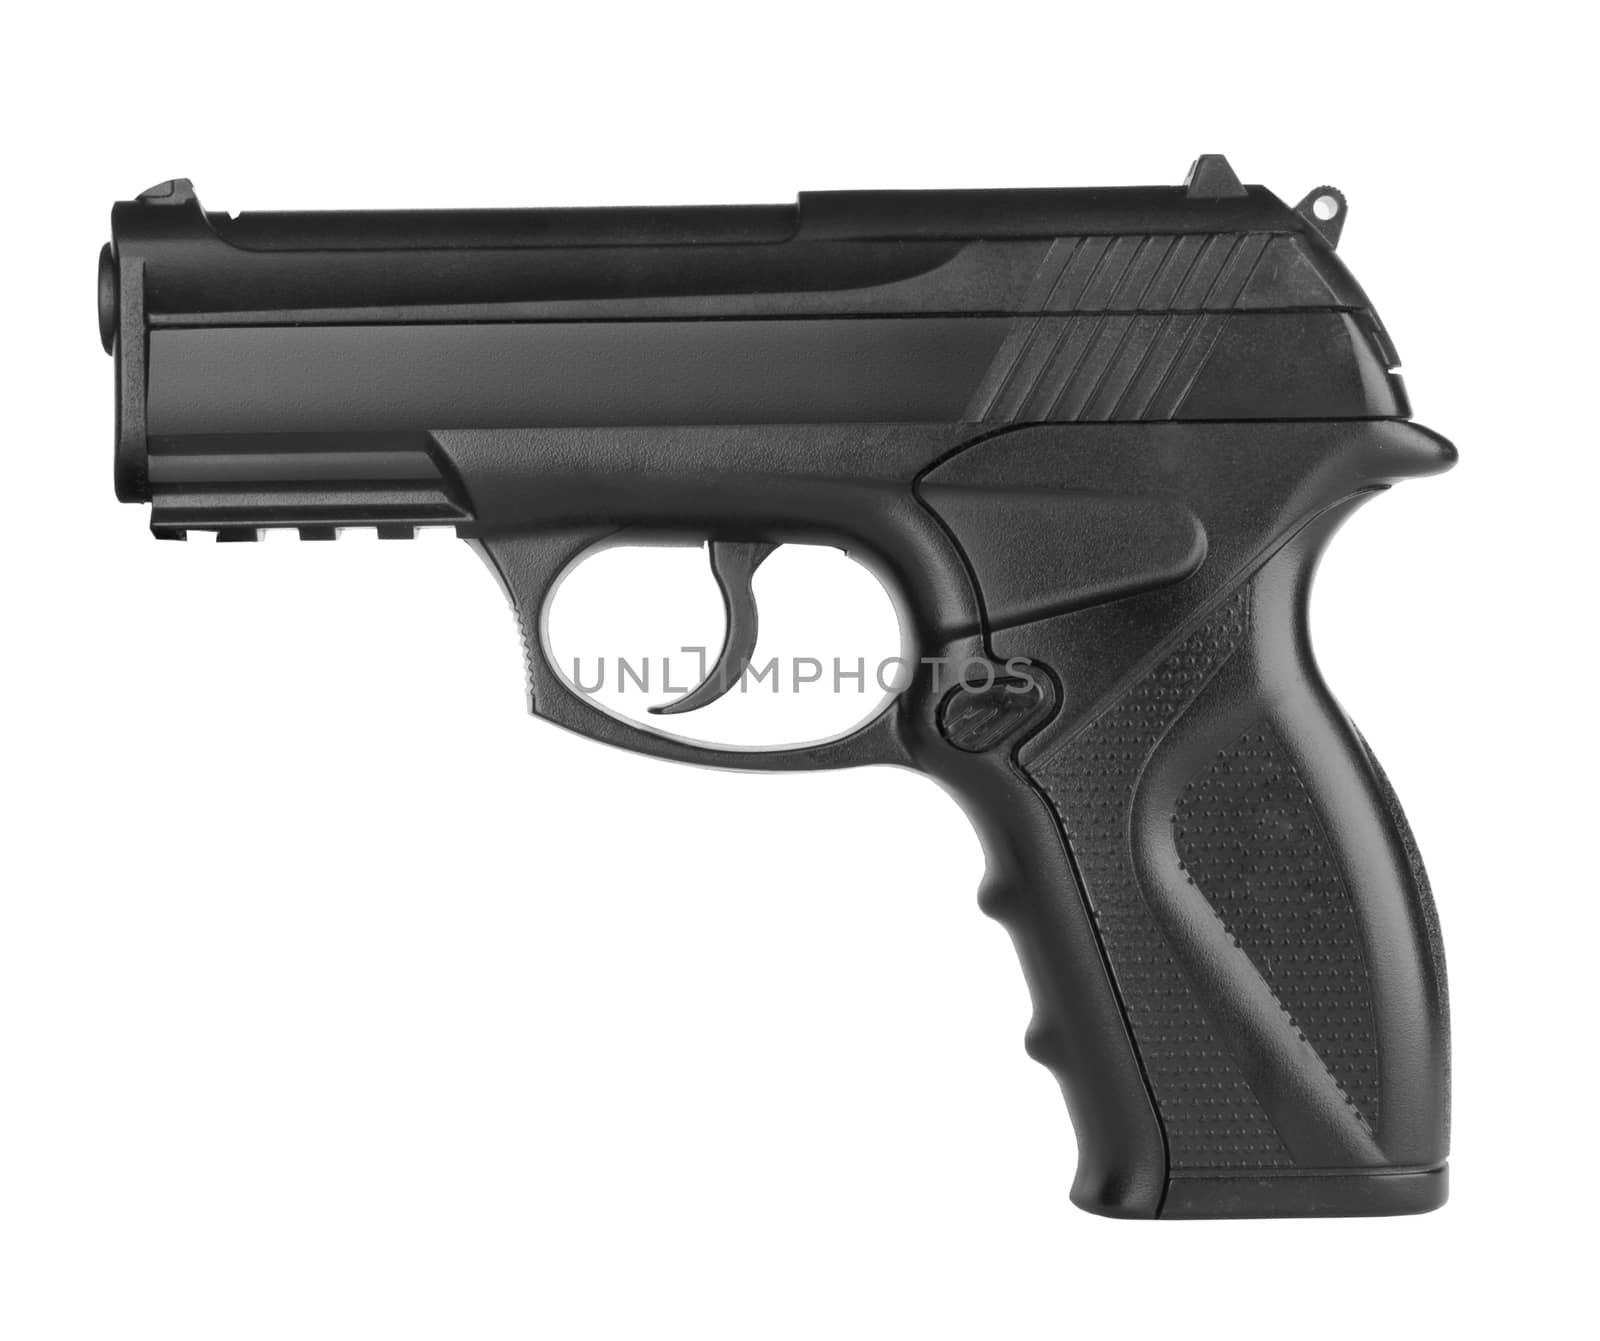 Pistol isolated on a white background